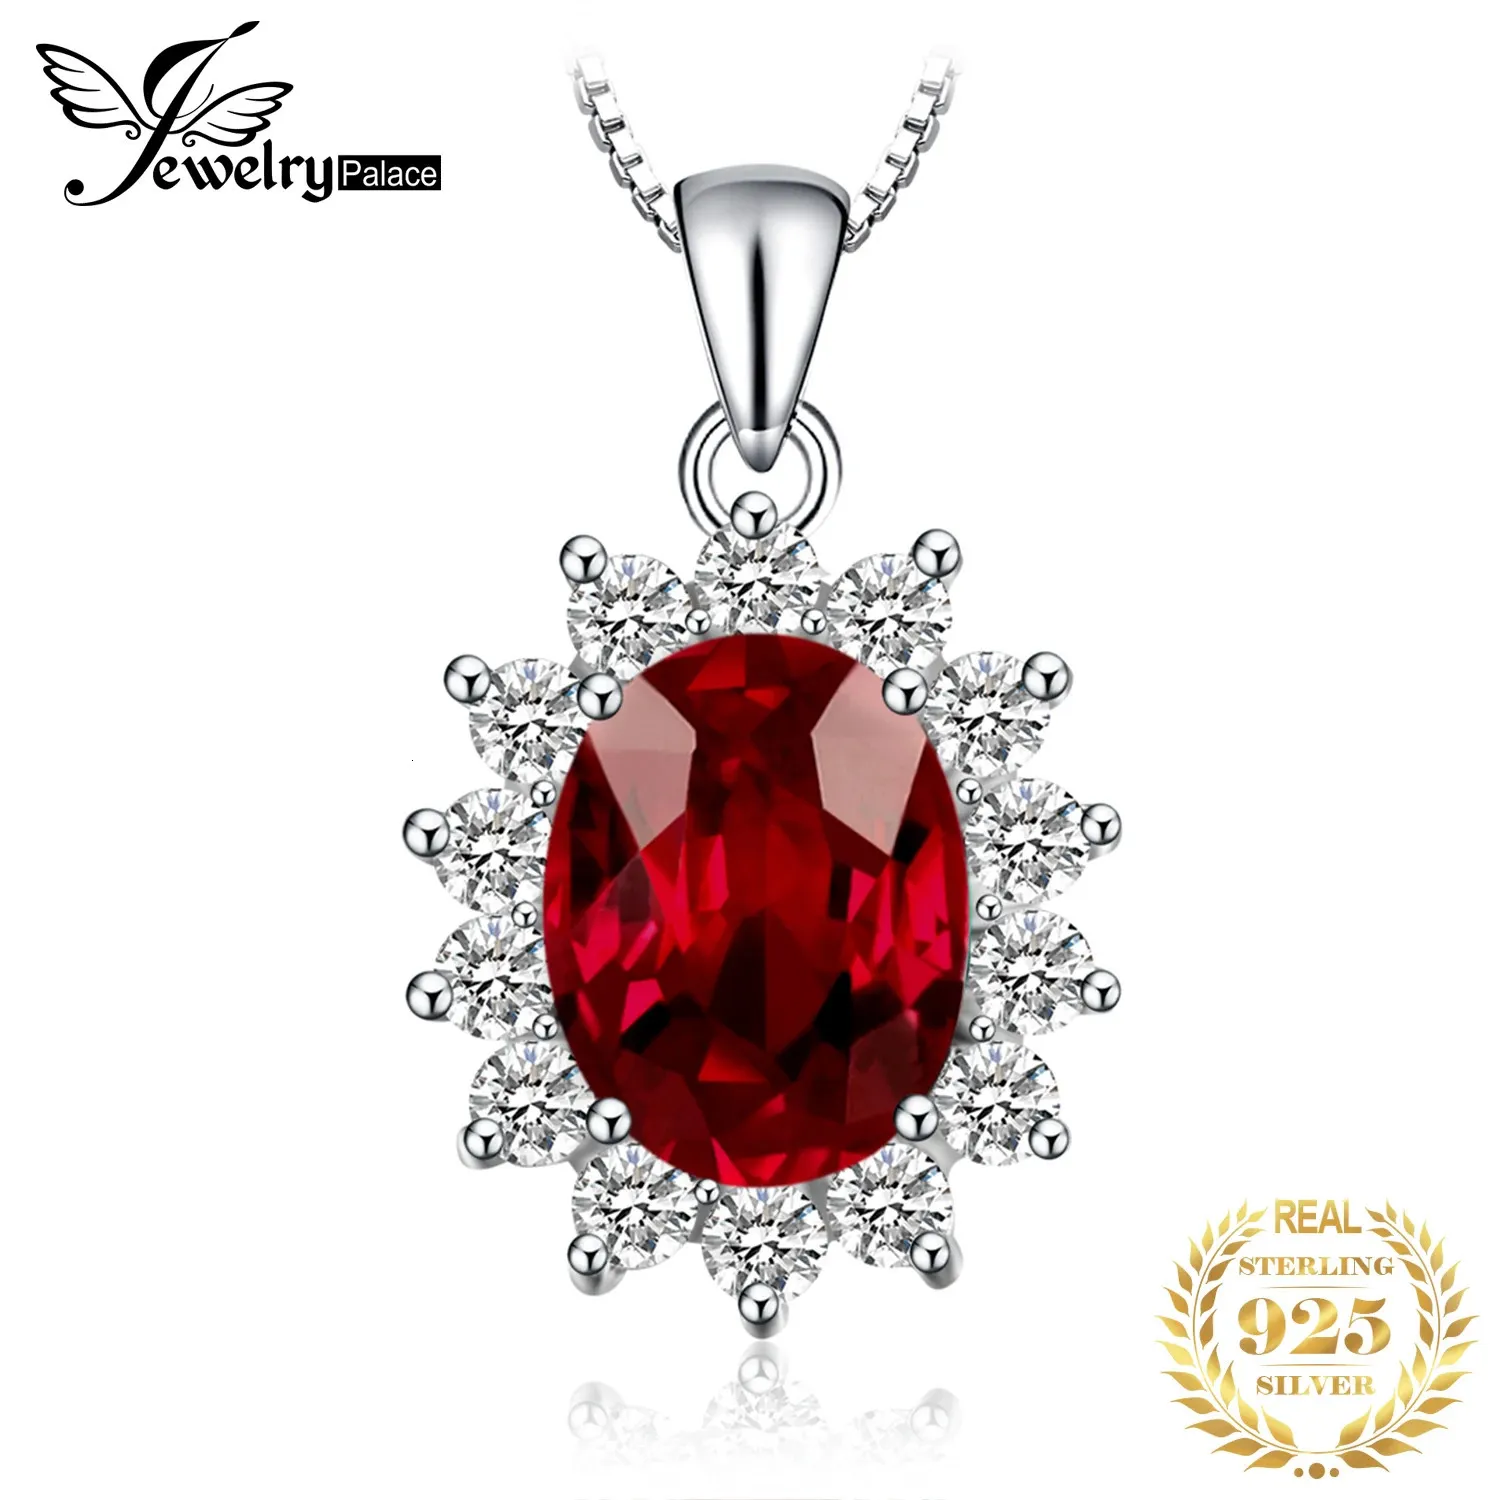 JewelryPalace 25ct Diana Natural Red Garnet 925 Sterling Silver Engagement Pendant Necklace for Woman Fashion Gift No Chain 240311